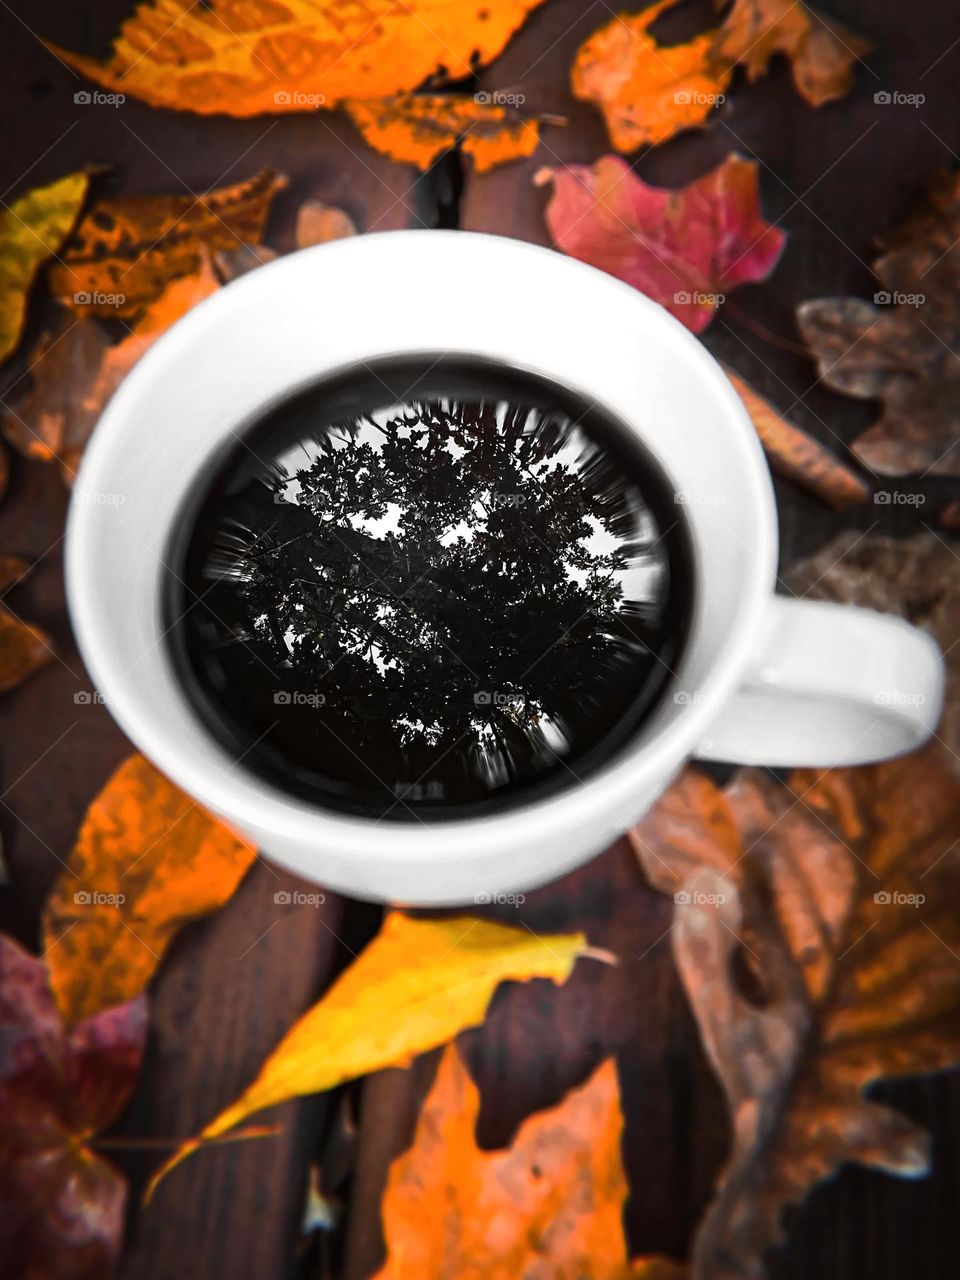 Fall autumn colors leafs crispy deck outdoors reflection reflecting liquid coffee cup rustic vibes autumnal equinox leaves colorful colors cool weather outdoors nature photography photo phone no people 